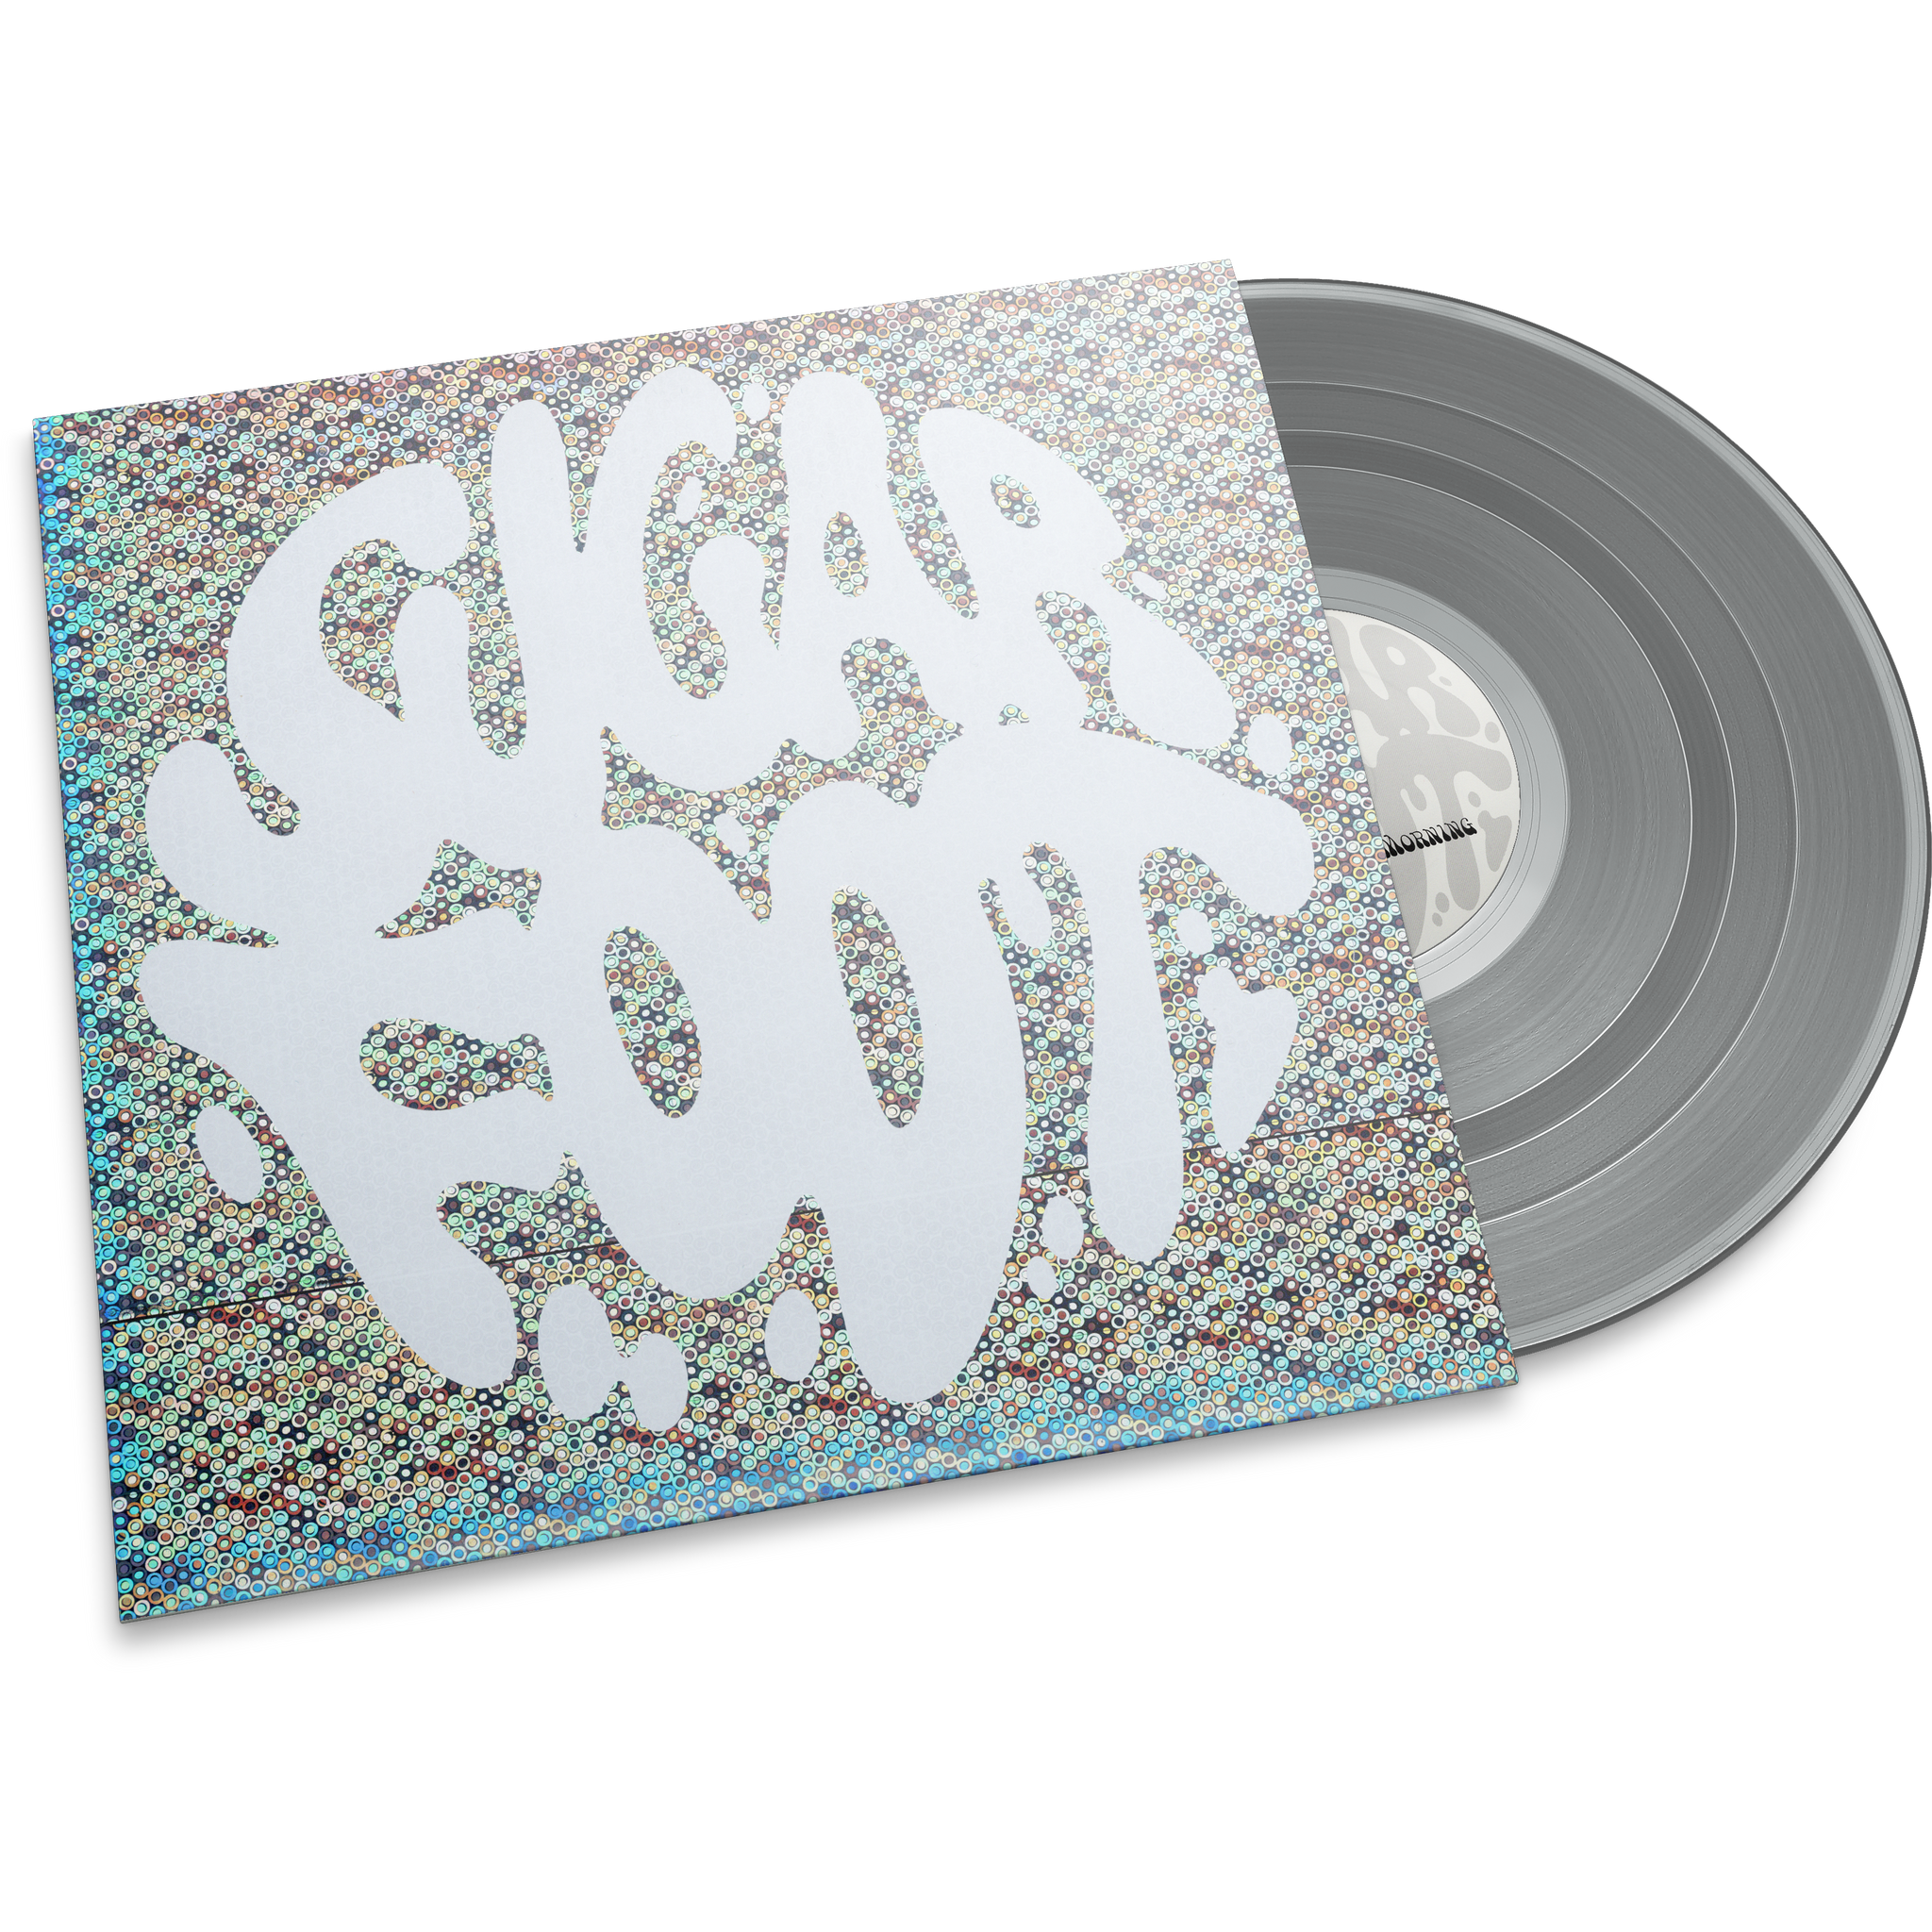 Sugarfoot - "Another Tinfoil Morning" (LTD psychedelic silver foil cover/ silver vinyl, 200 copies)